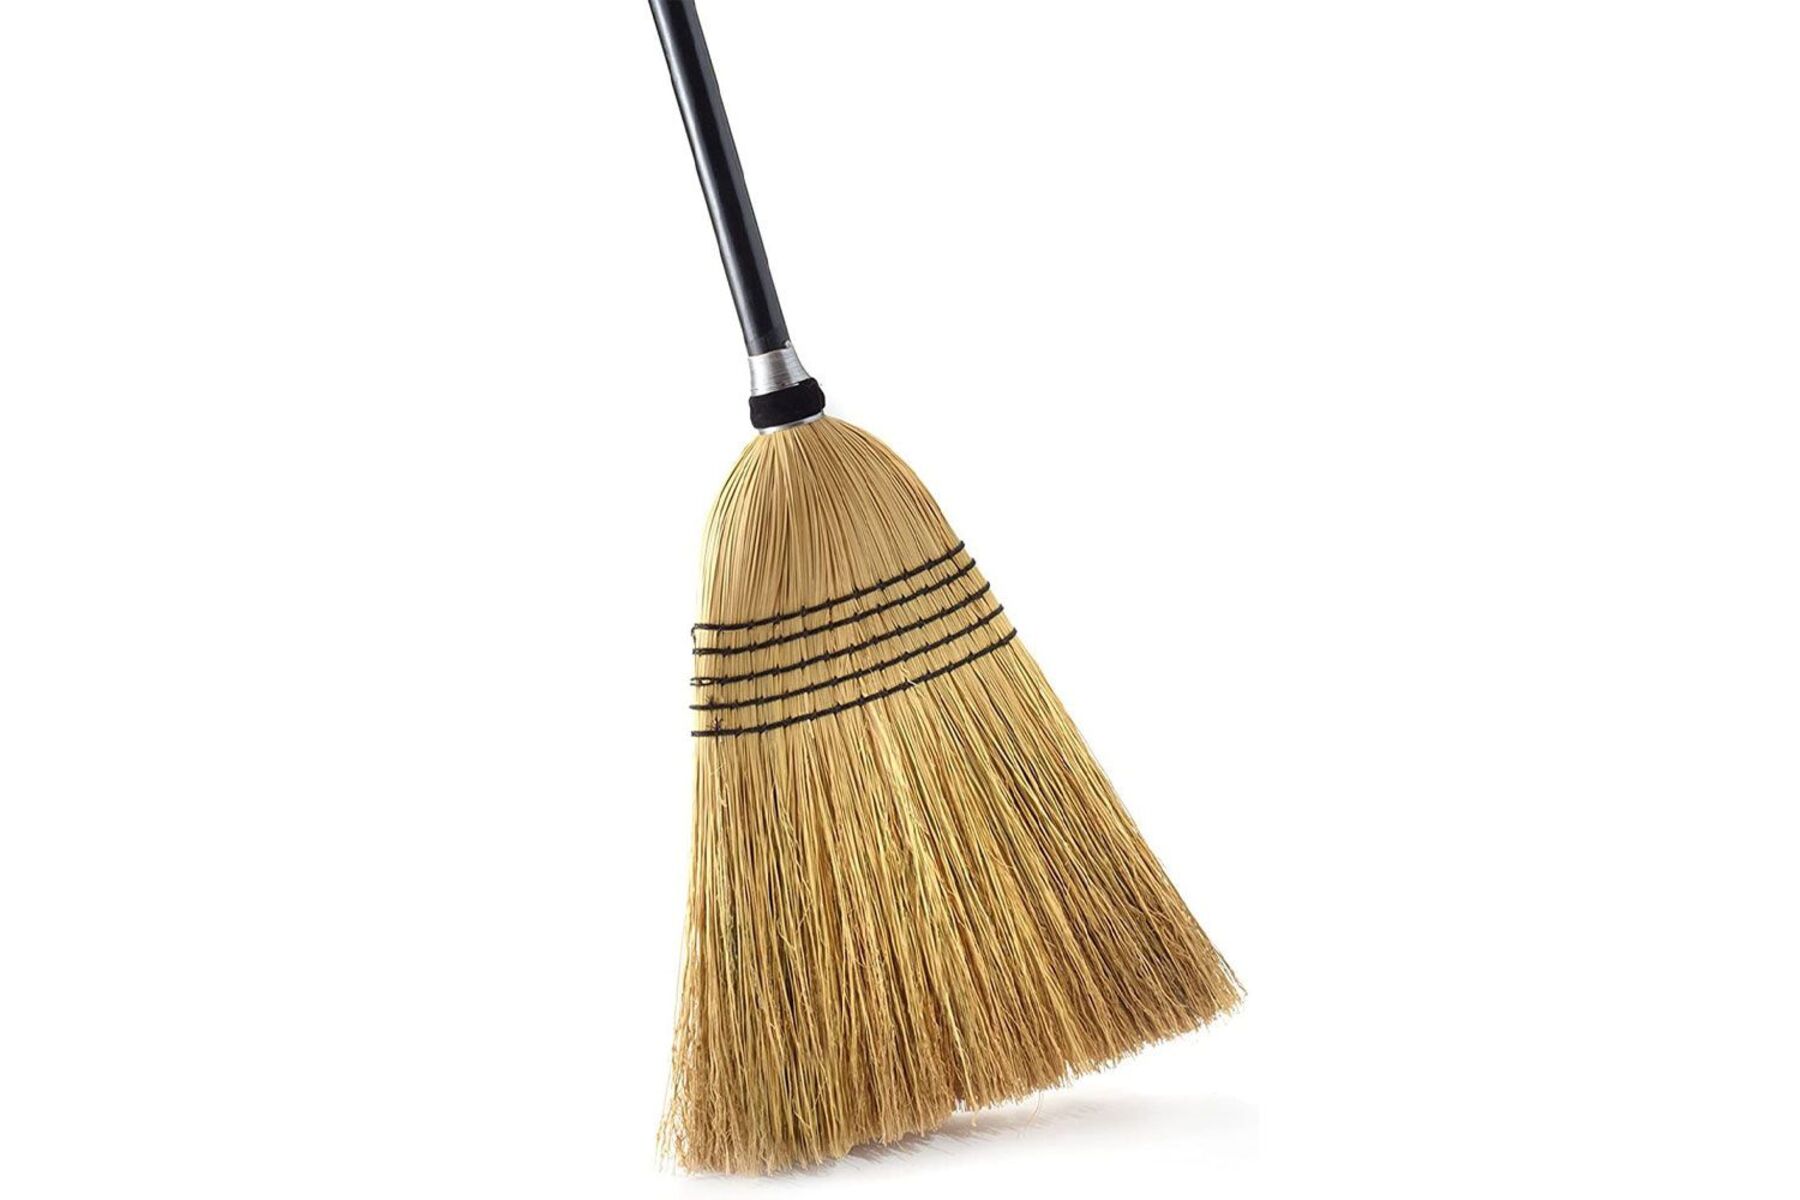 What Is The Best Broom